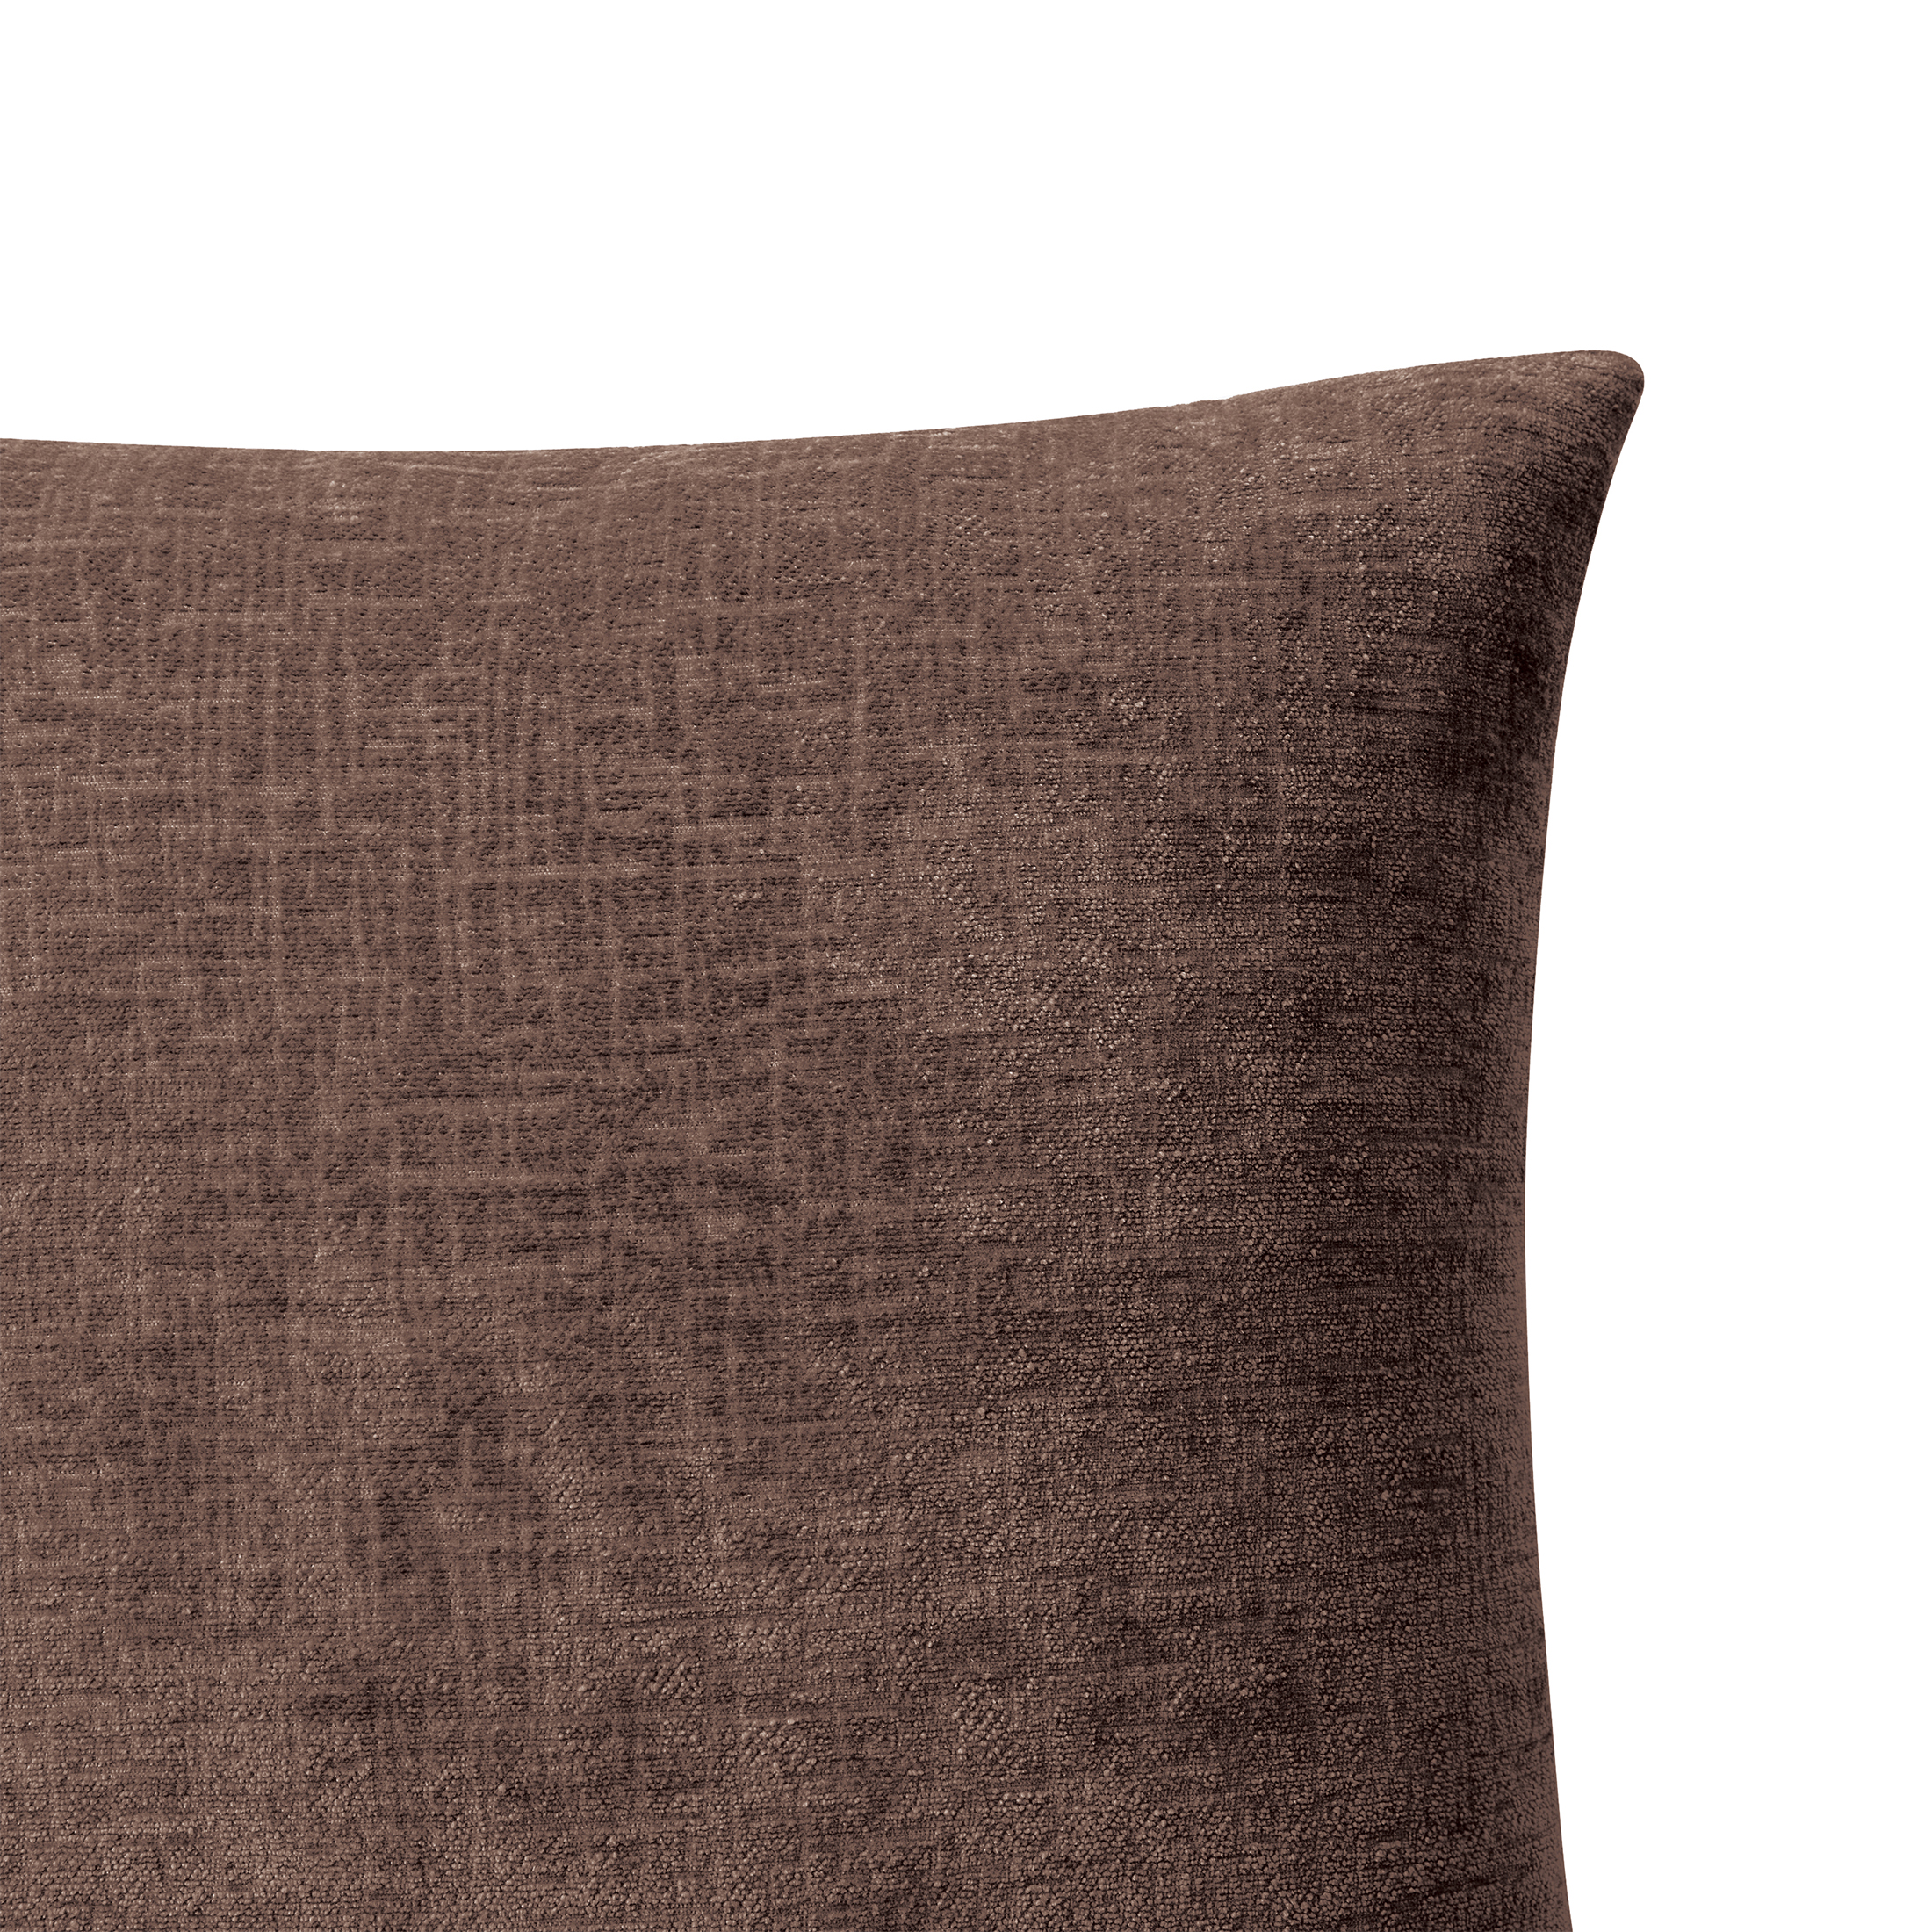 Brown Solid Chenille Decorative Pillow Set, Mainstays, 18" x 18", 2 Pieces - image 4 of 5